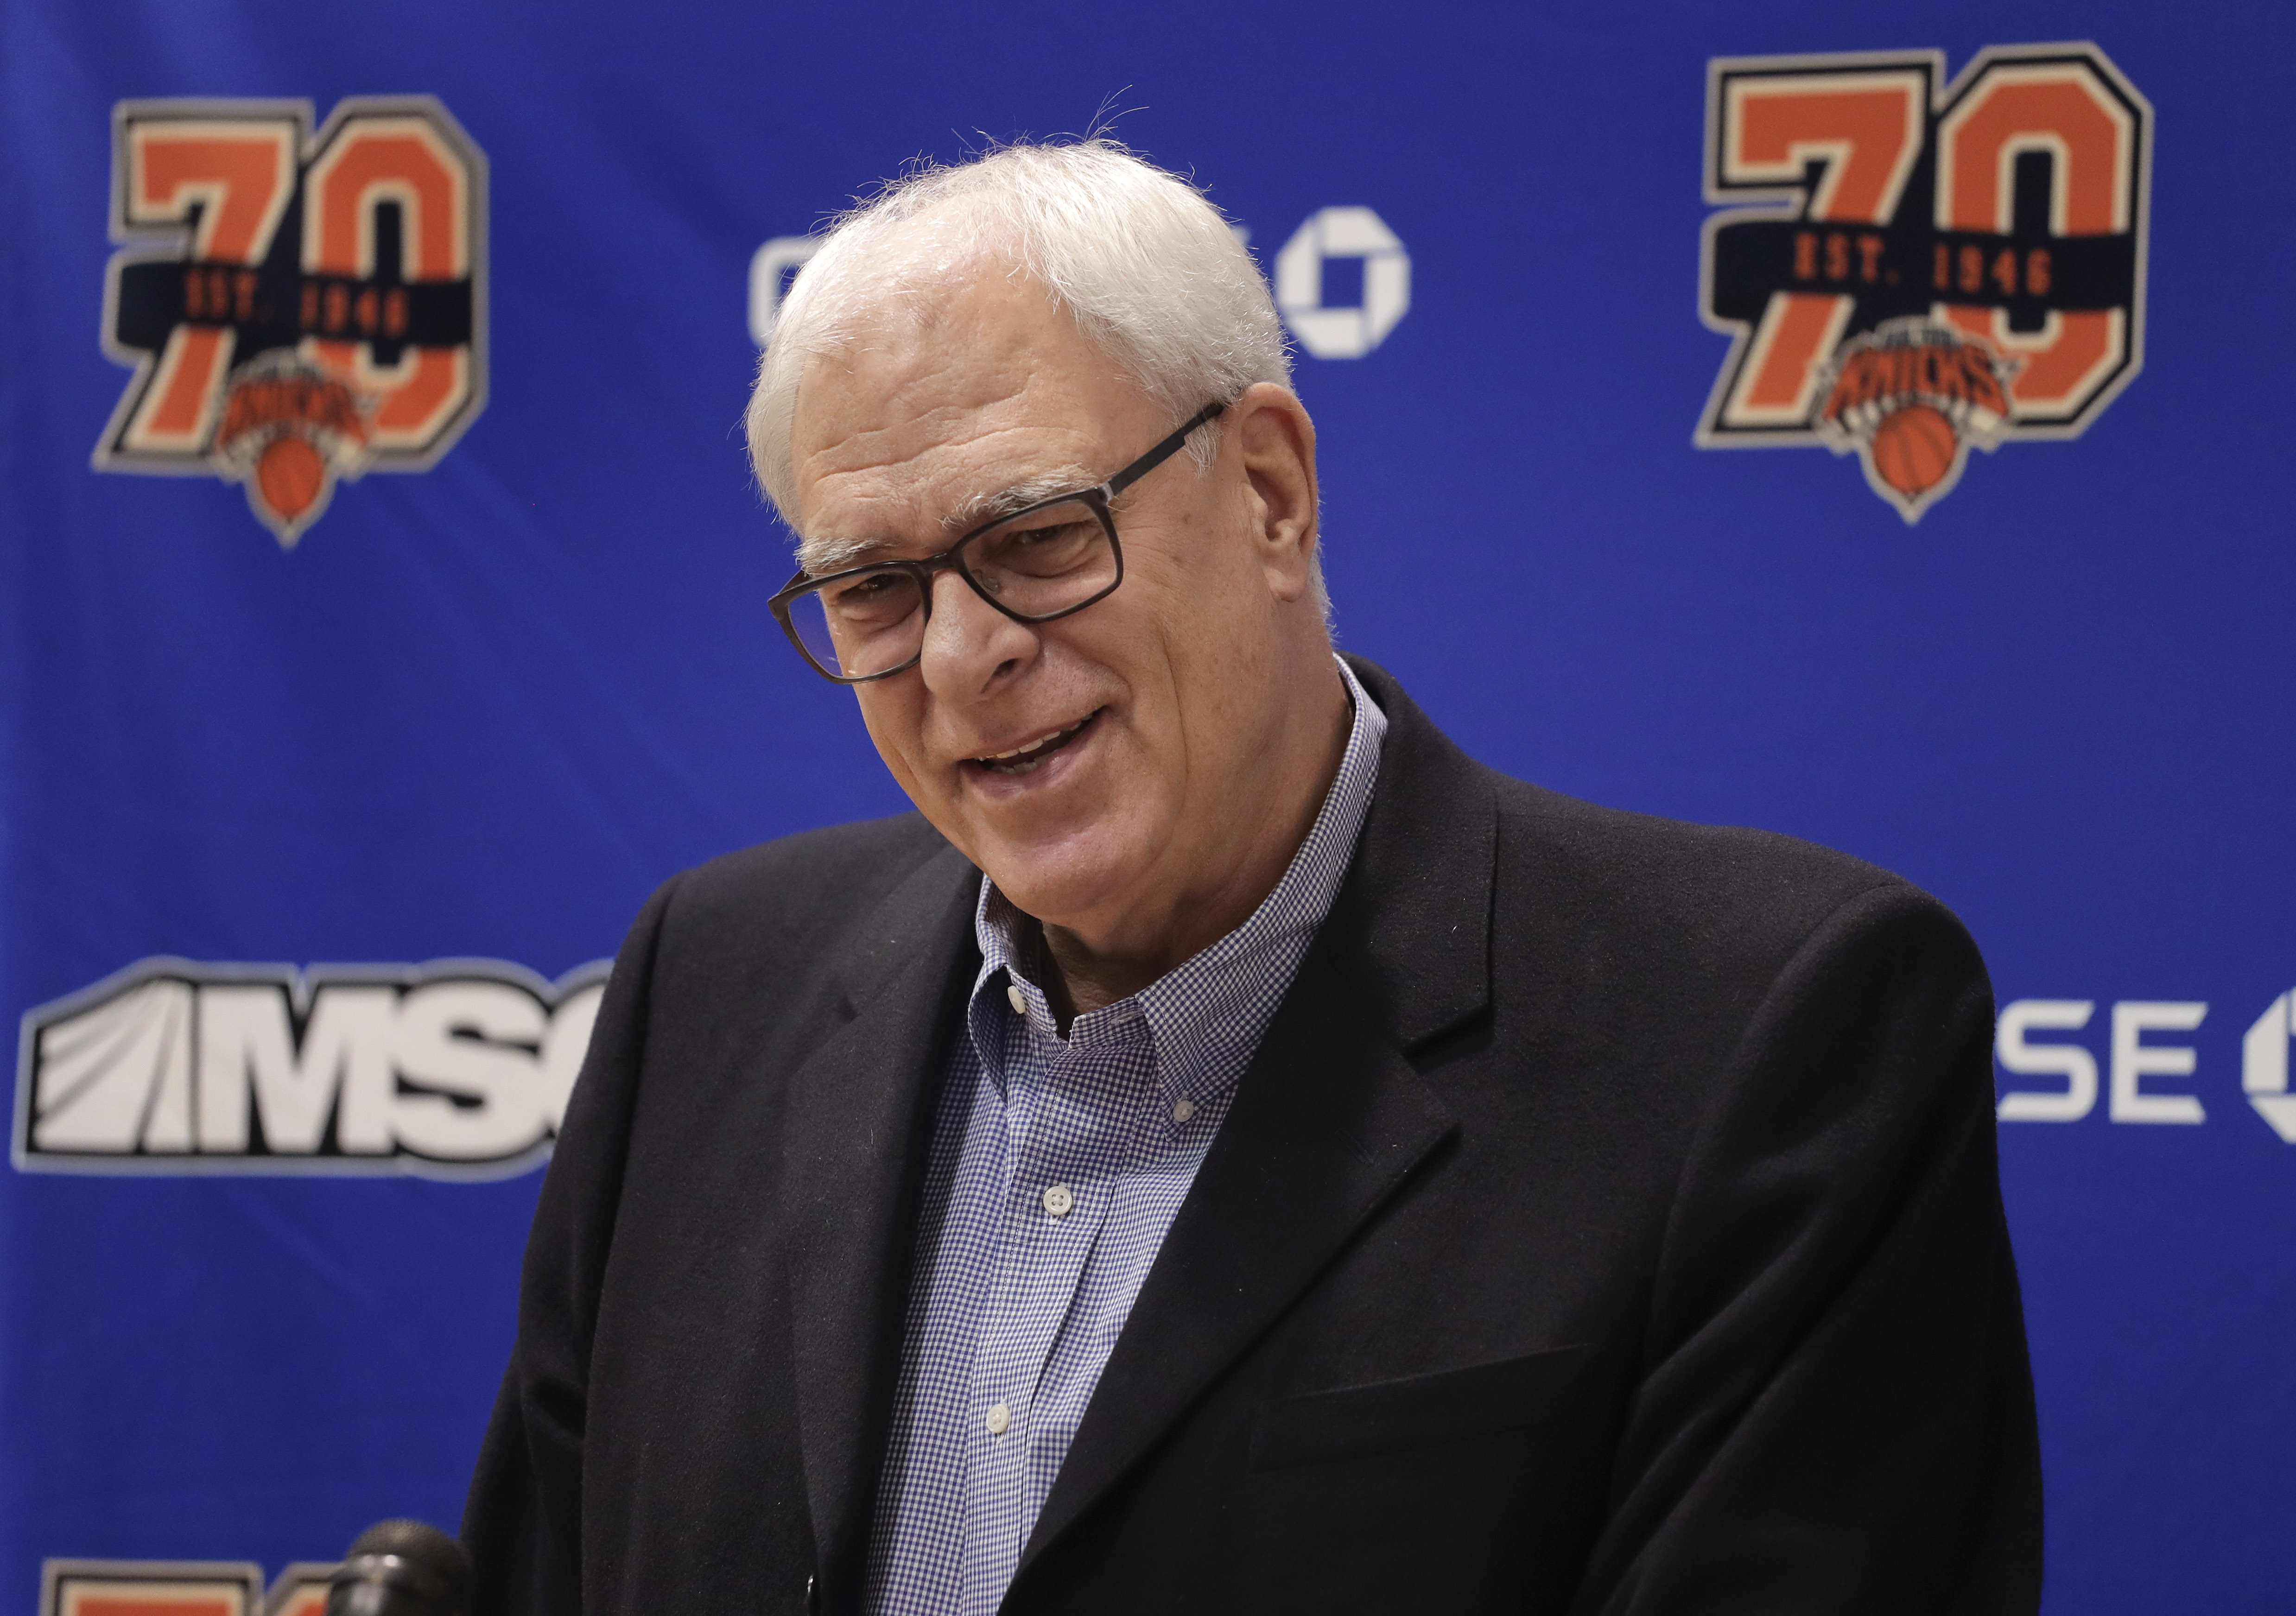 New York Knicks president Phil Jackson answers questions during a news conference at the team's training facility, Friday, April 14, 2017, in Greenburgh, N.Y. (AP Photo/Julie Jacobson)